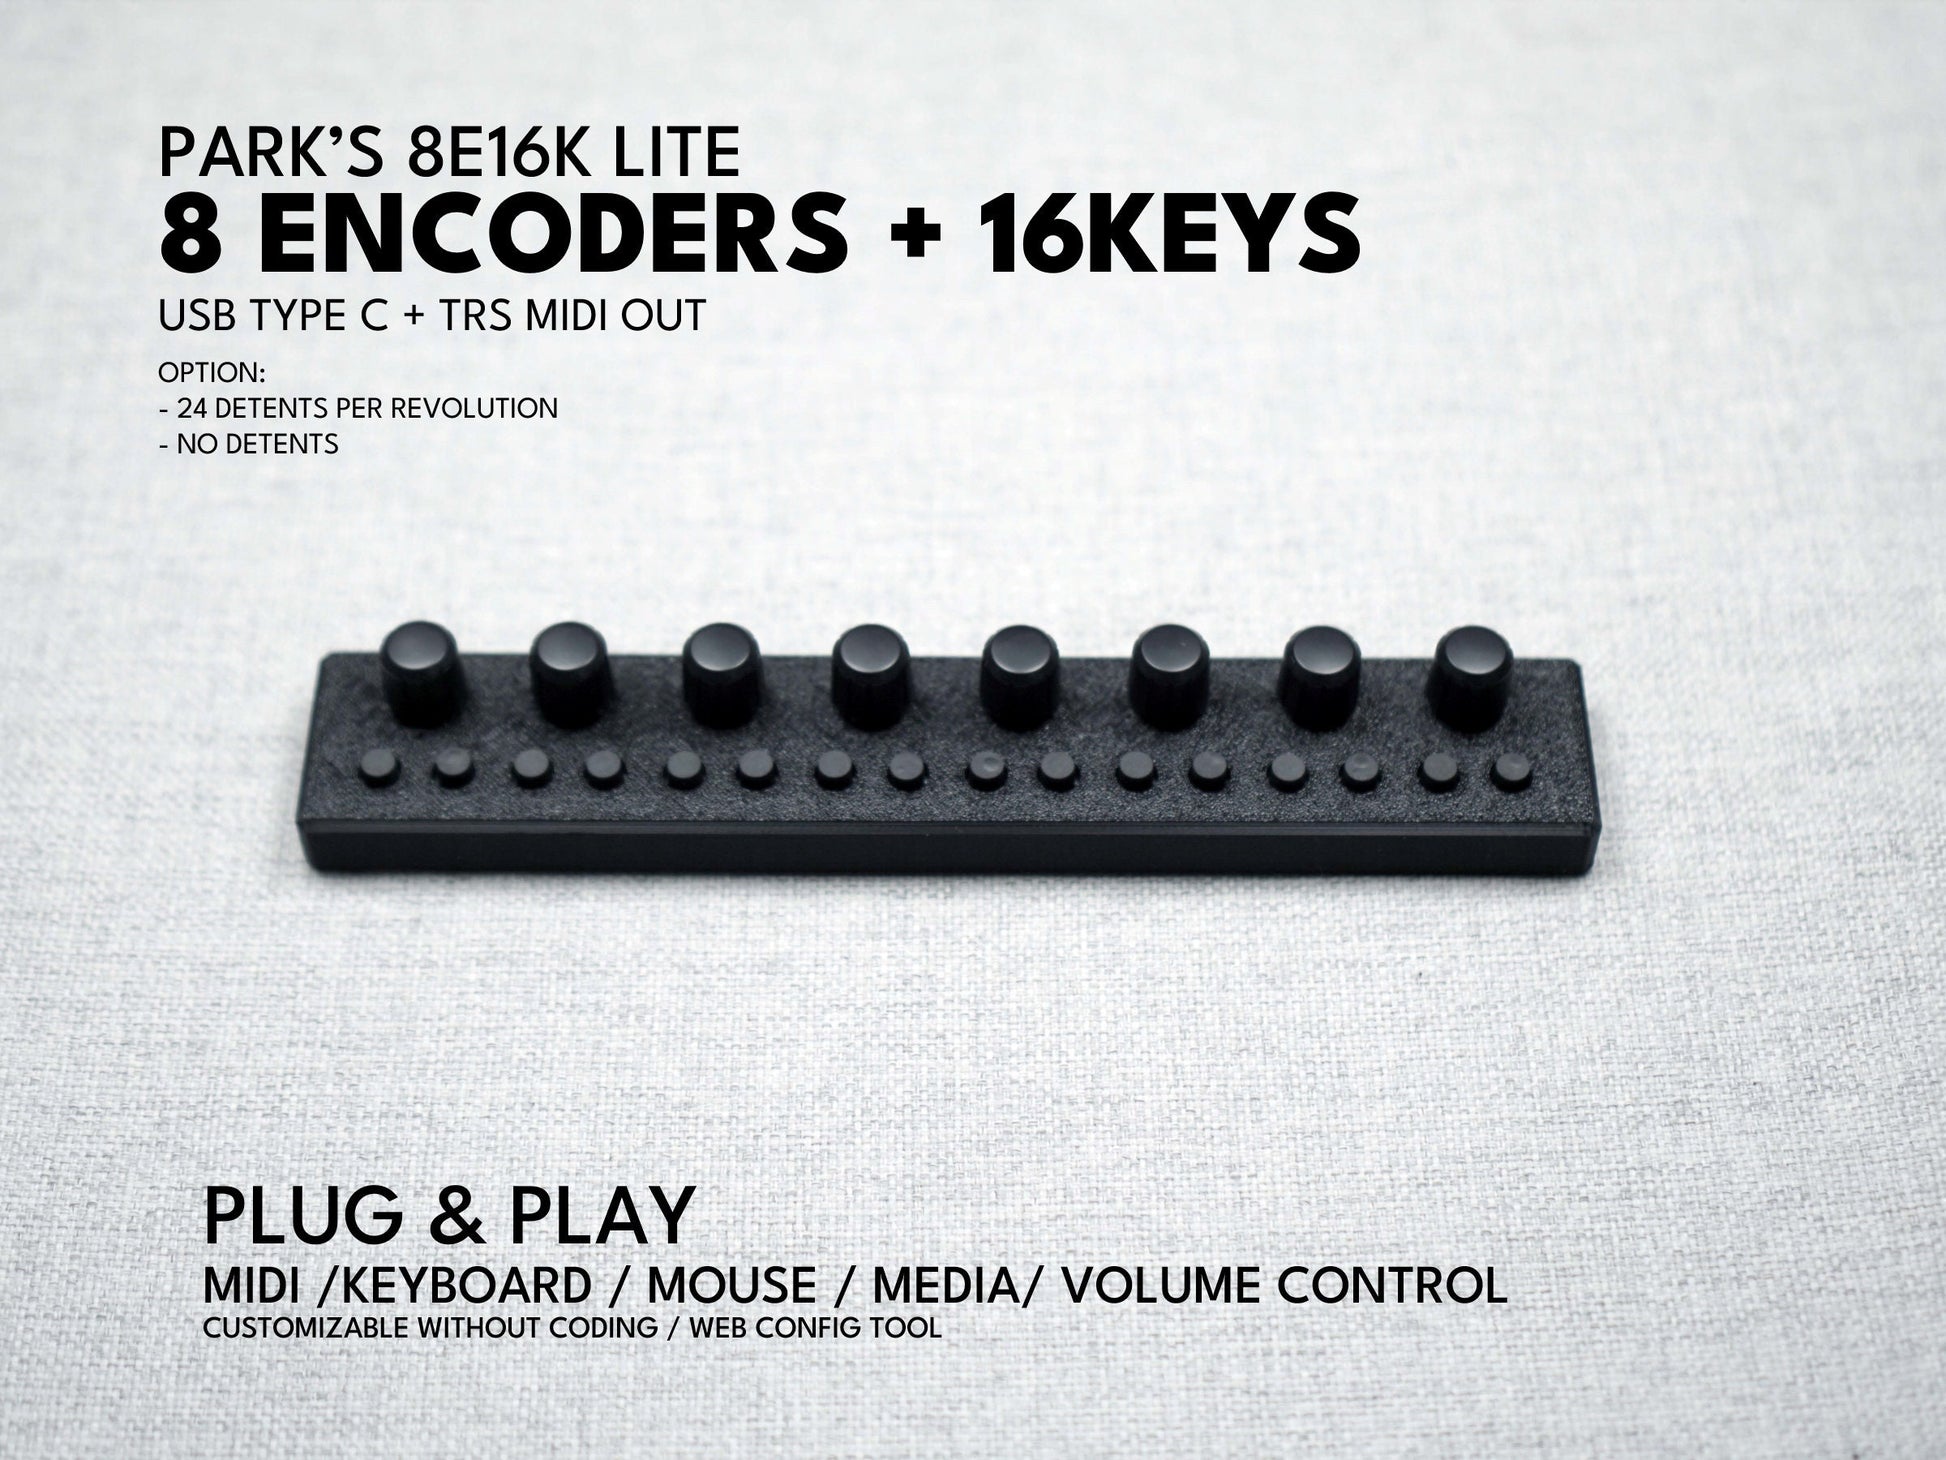 Park's 8E16K: 8 Encoders with 16 Keys / MIDI / Plug and Play / customizable / diy / MCP / keyboard mouse volume / Sound Devices